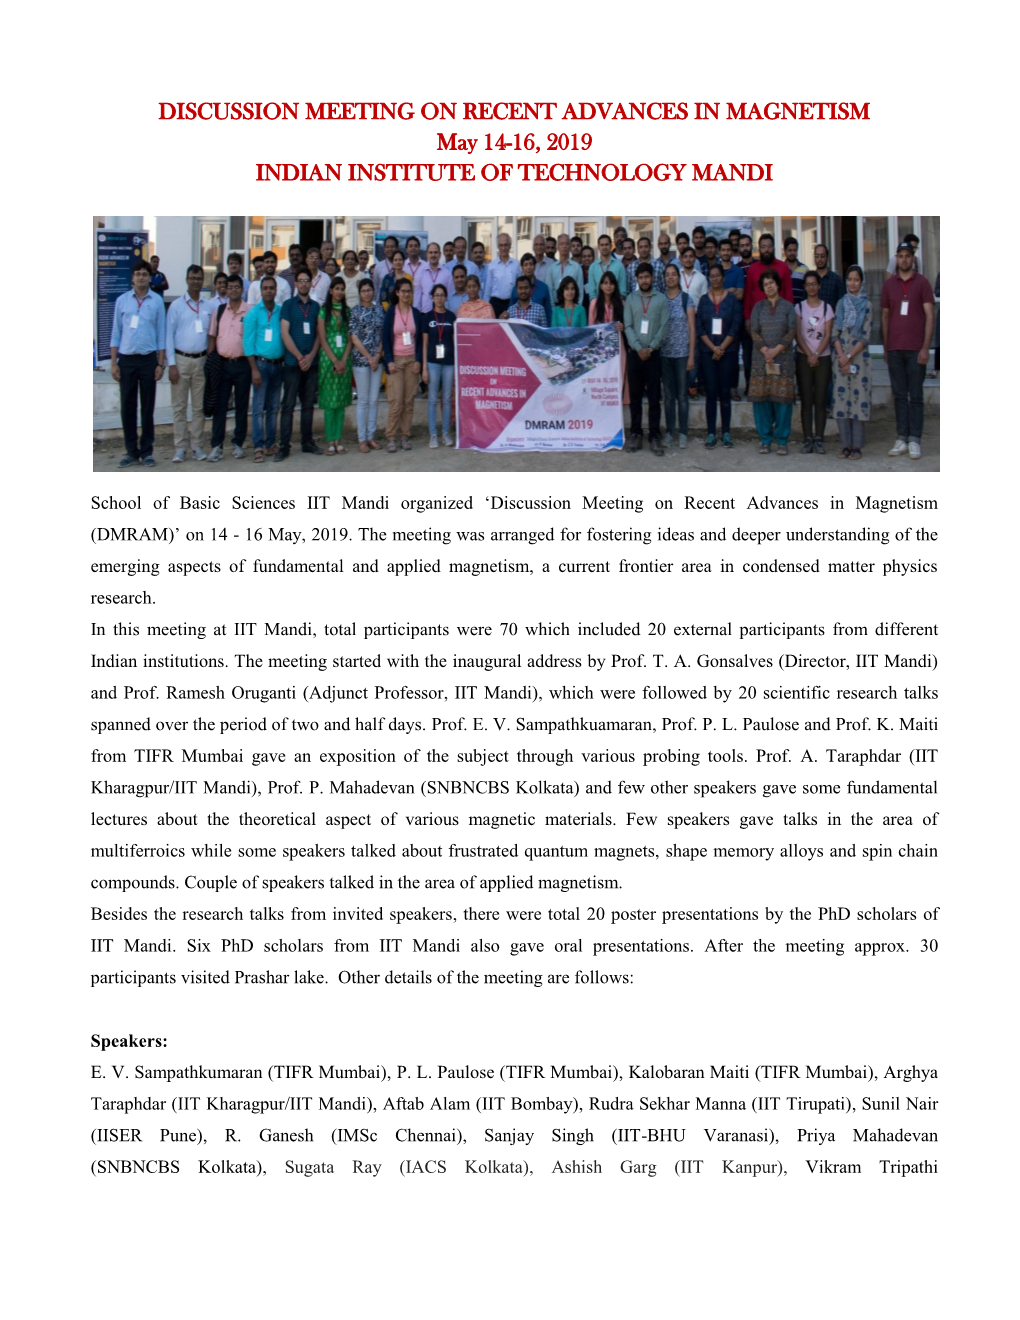 DISCUSSION MEETING on RECENT ADVANCES in MAGNETISM May 14-16, 2019 INDIAN INSTITUTE of TECHNOLOGY MANDI